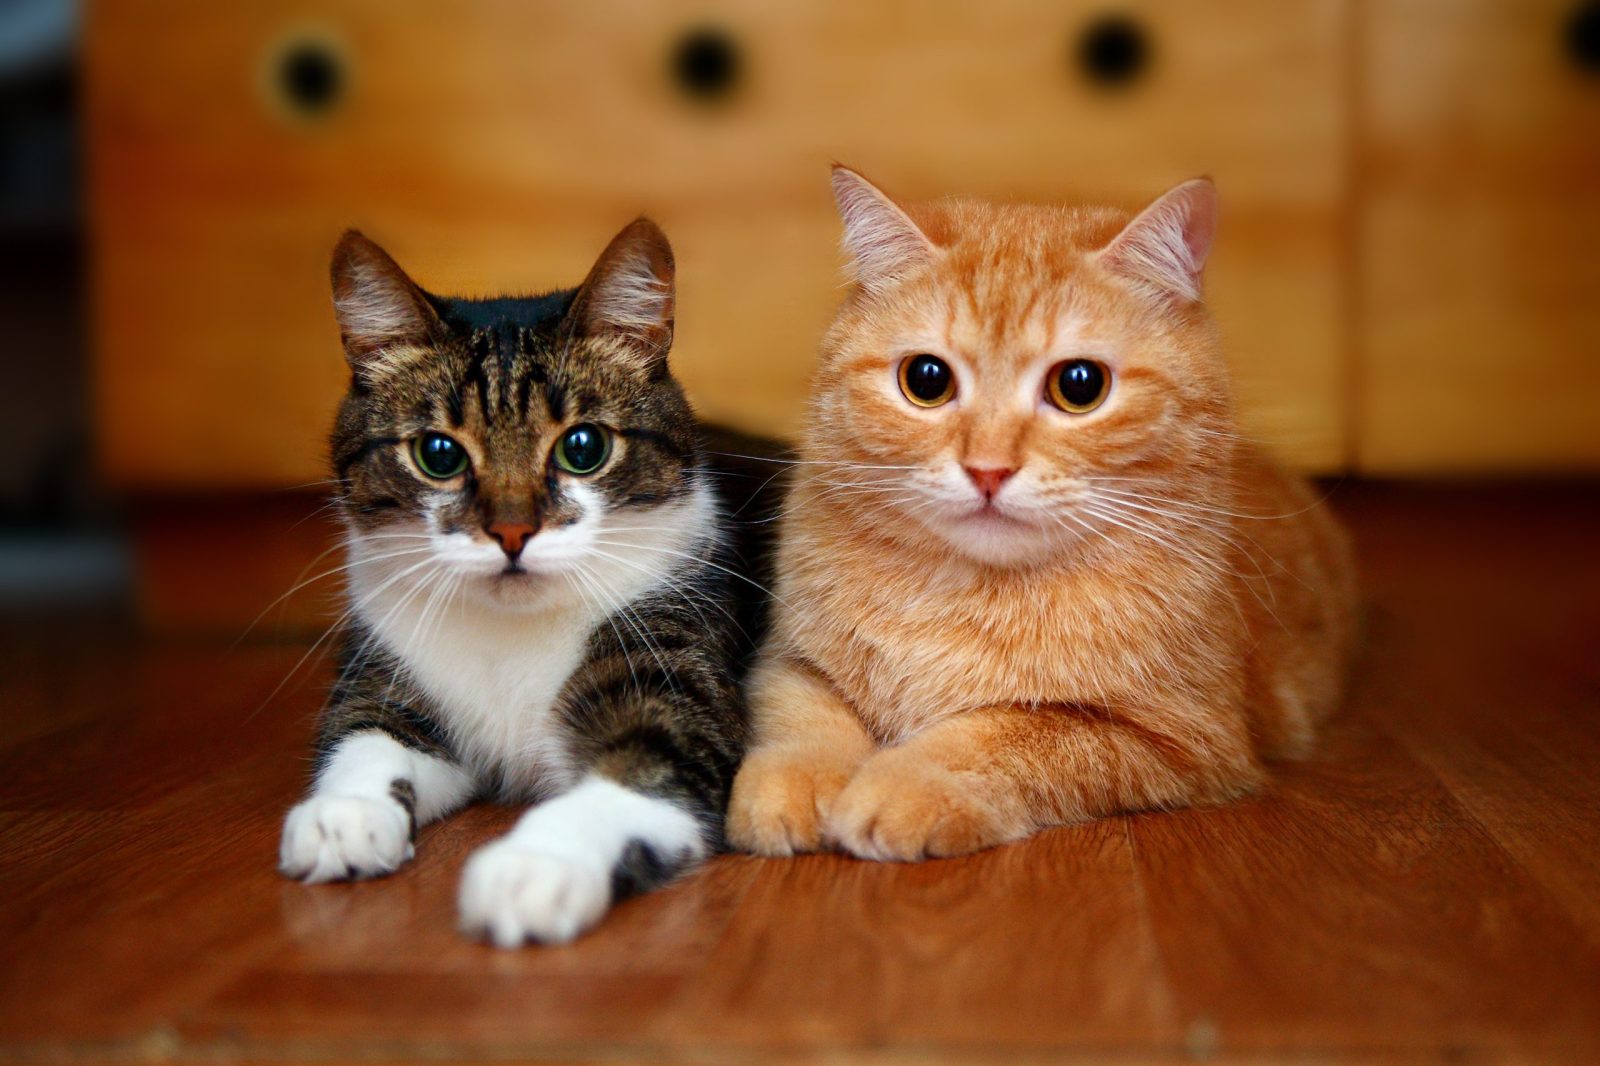 Orange and tabby cat sitting together